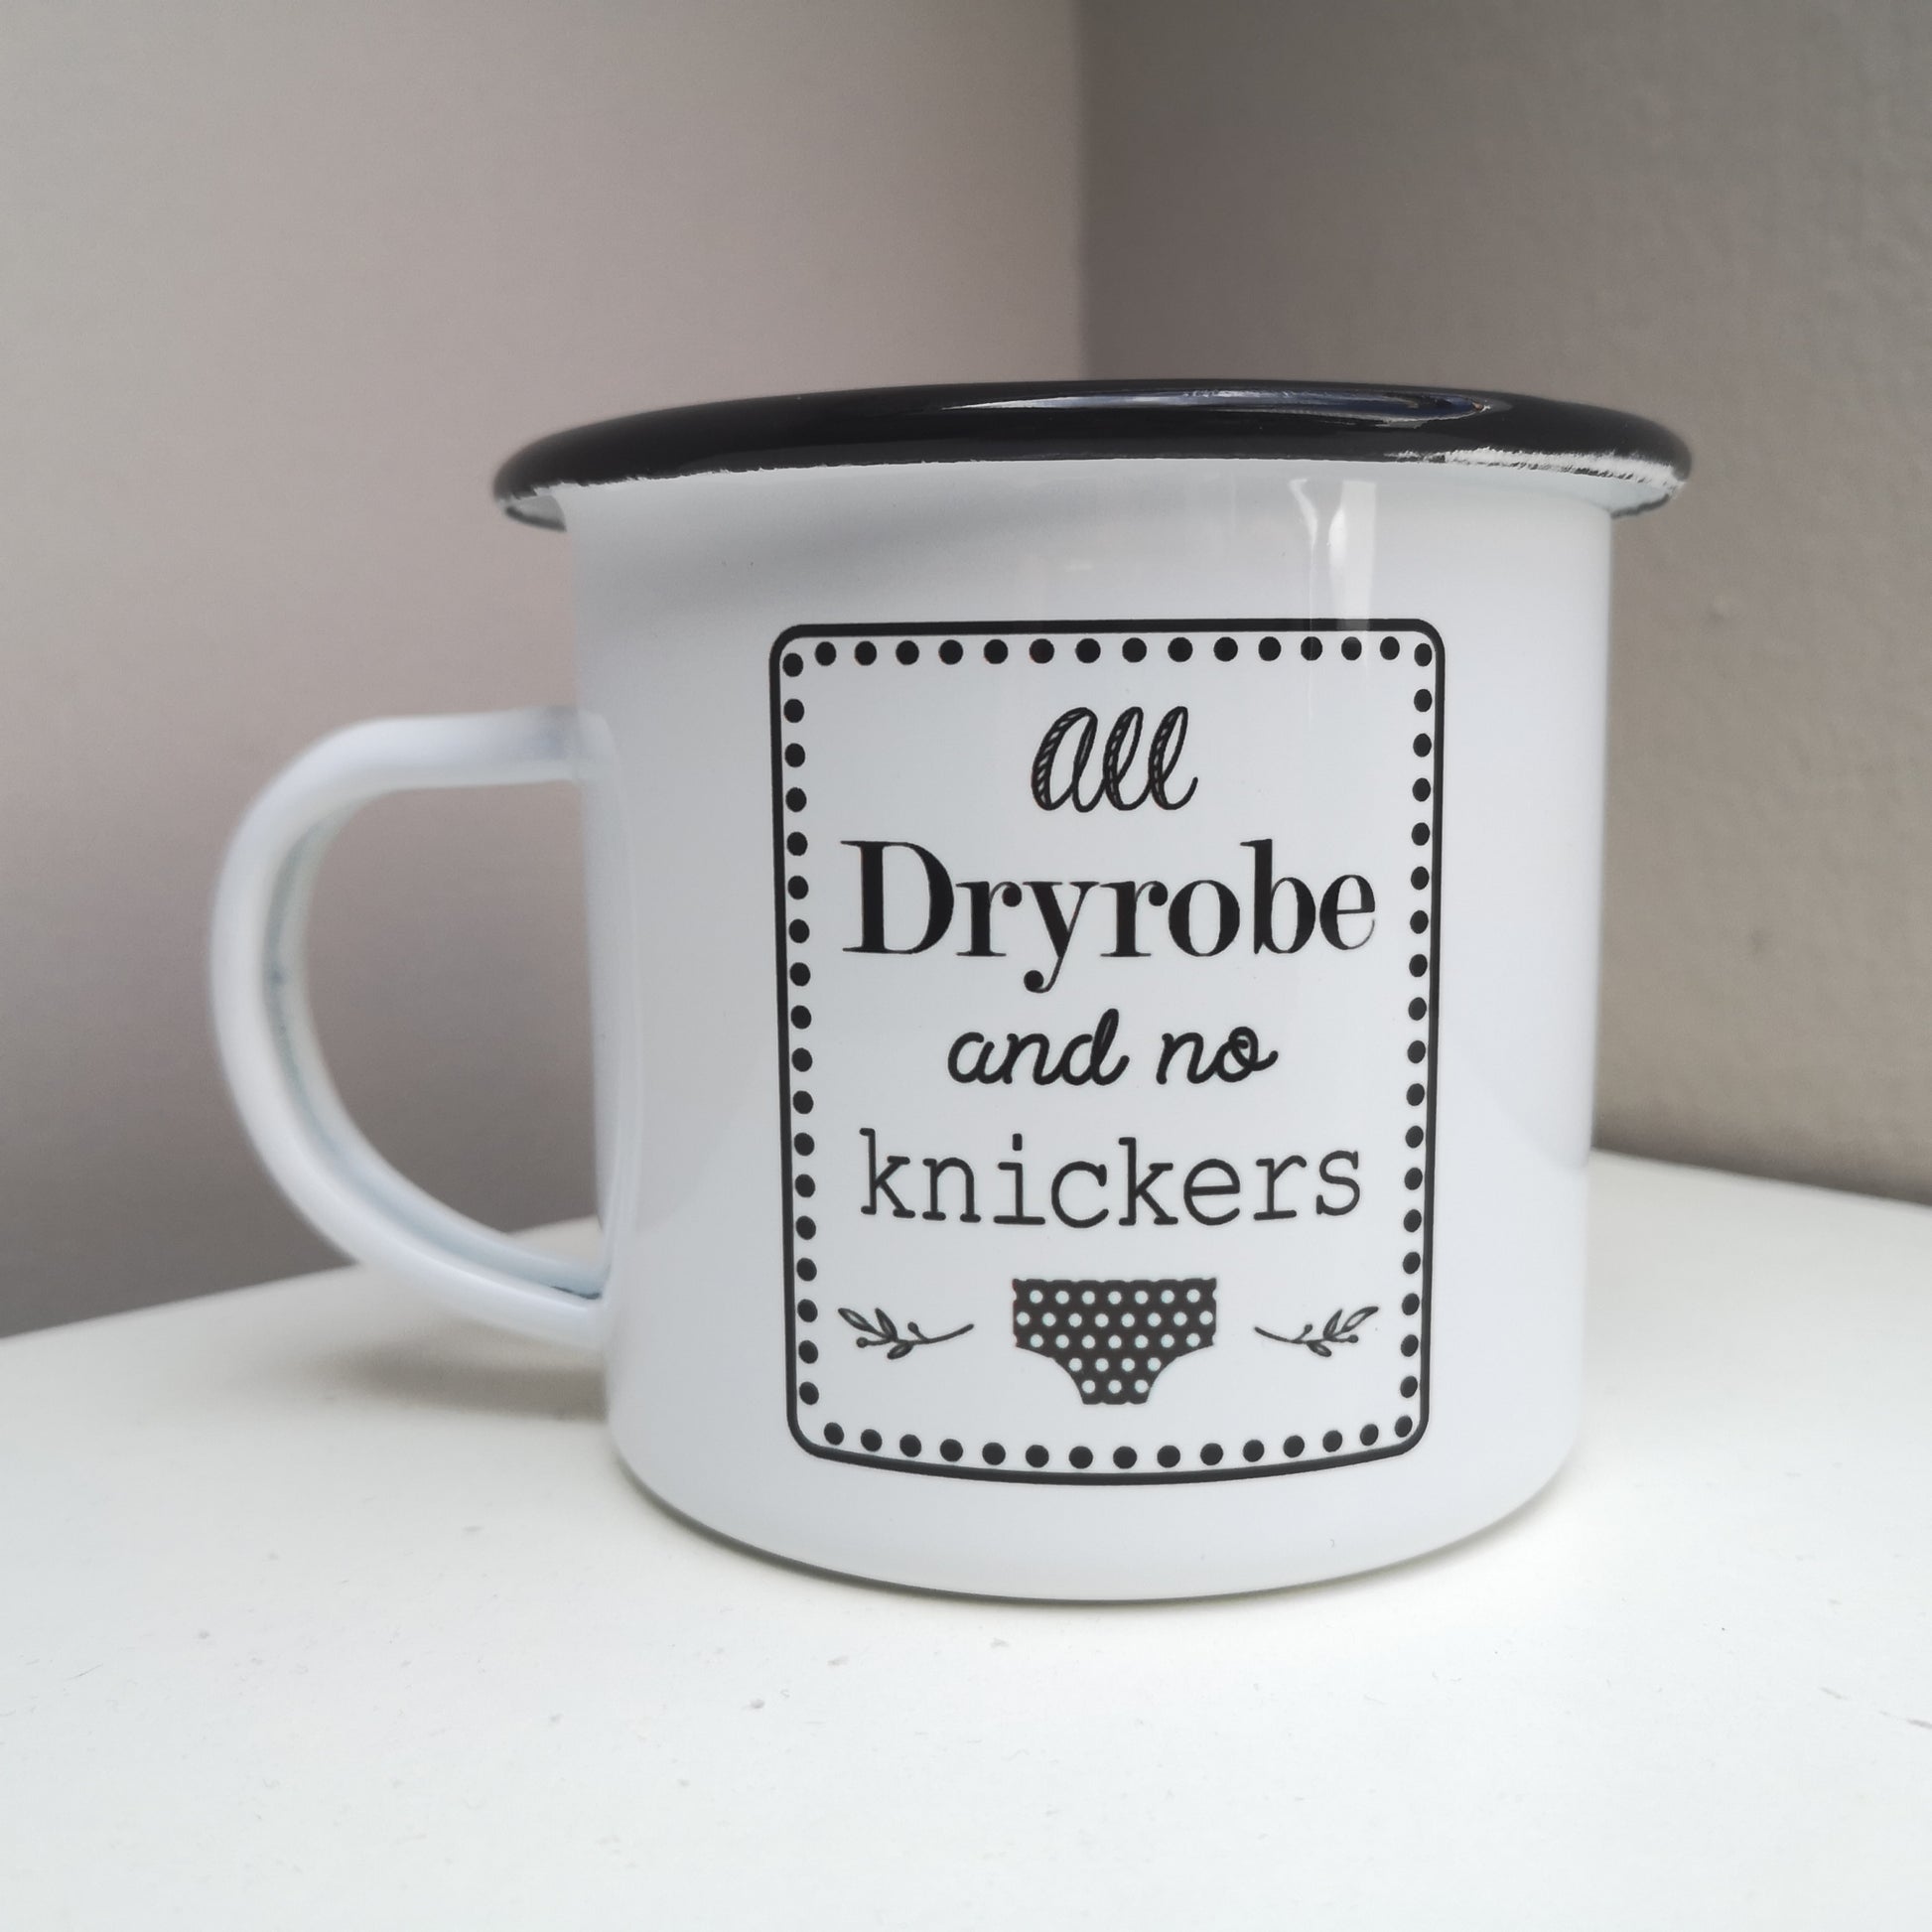 A white steel enamel mug with ALL DRYROBE AND NO KNICKERS on it in black and white text.  And black and white spotty knickers.  